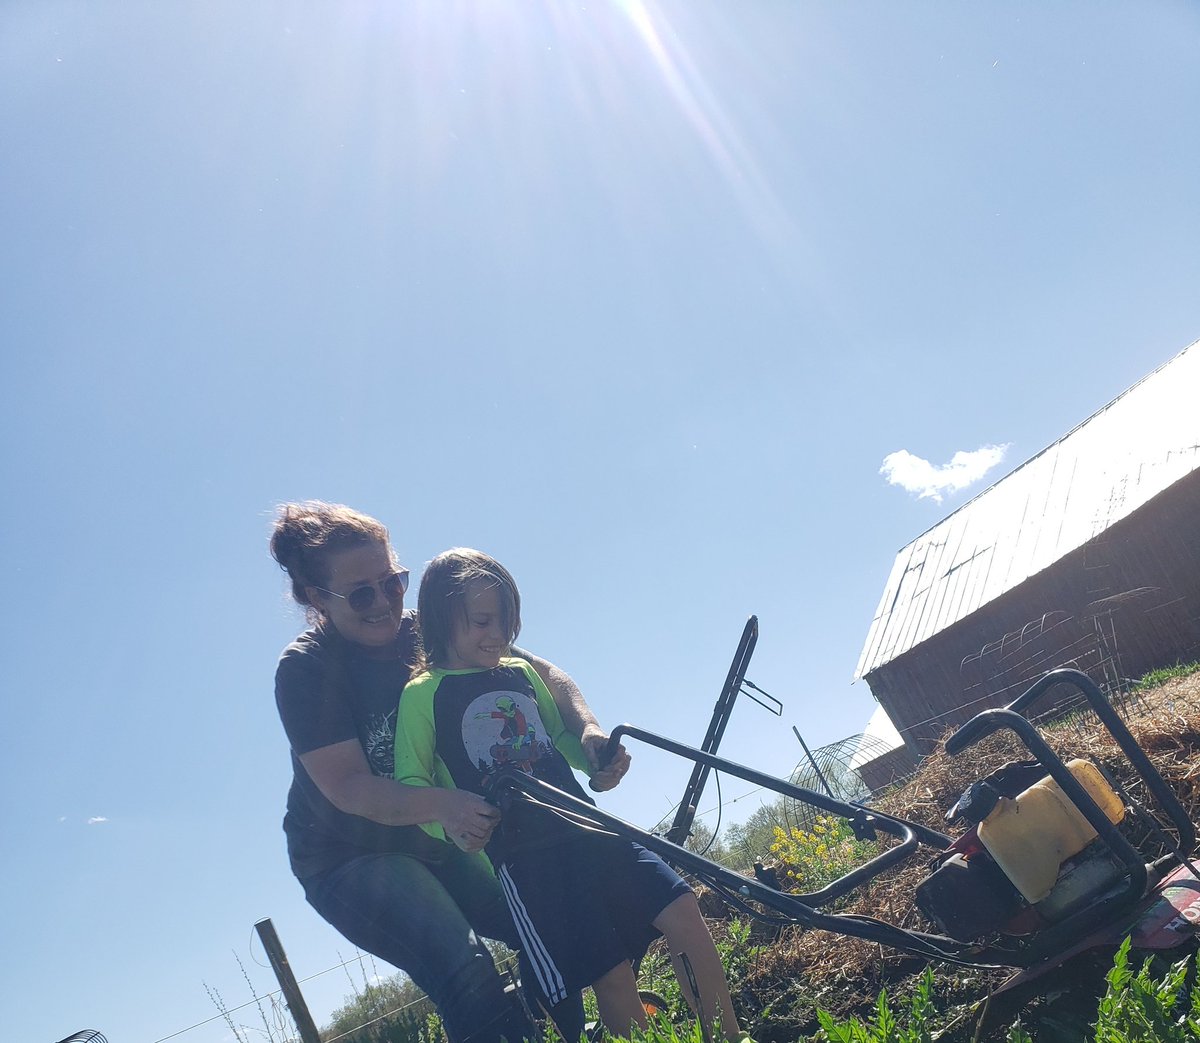 We are getting more of the garden in today. The youngest really wanted to give the tiller a try. It whupped his butt..but he gave it his all! ❤ Maybe next year little dude.